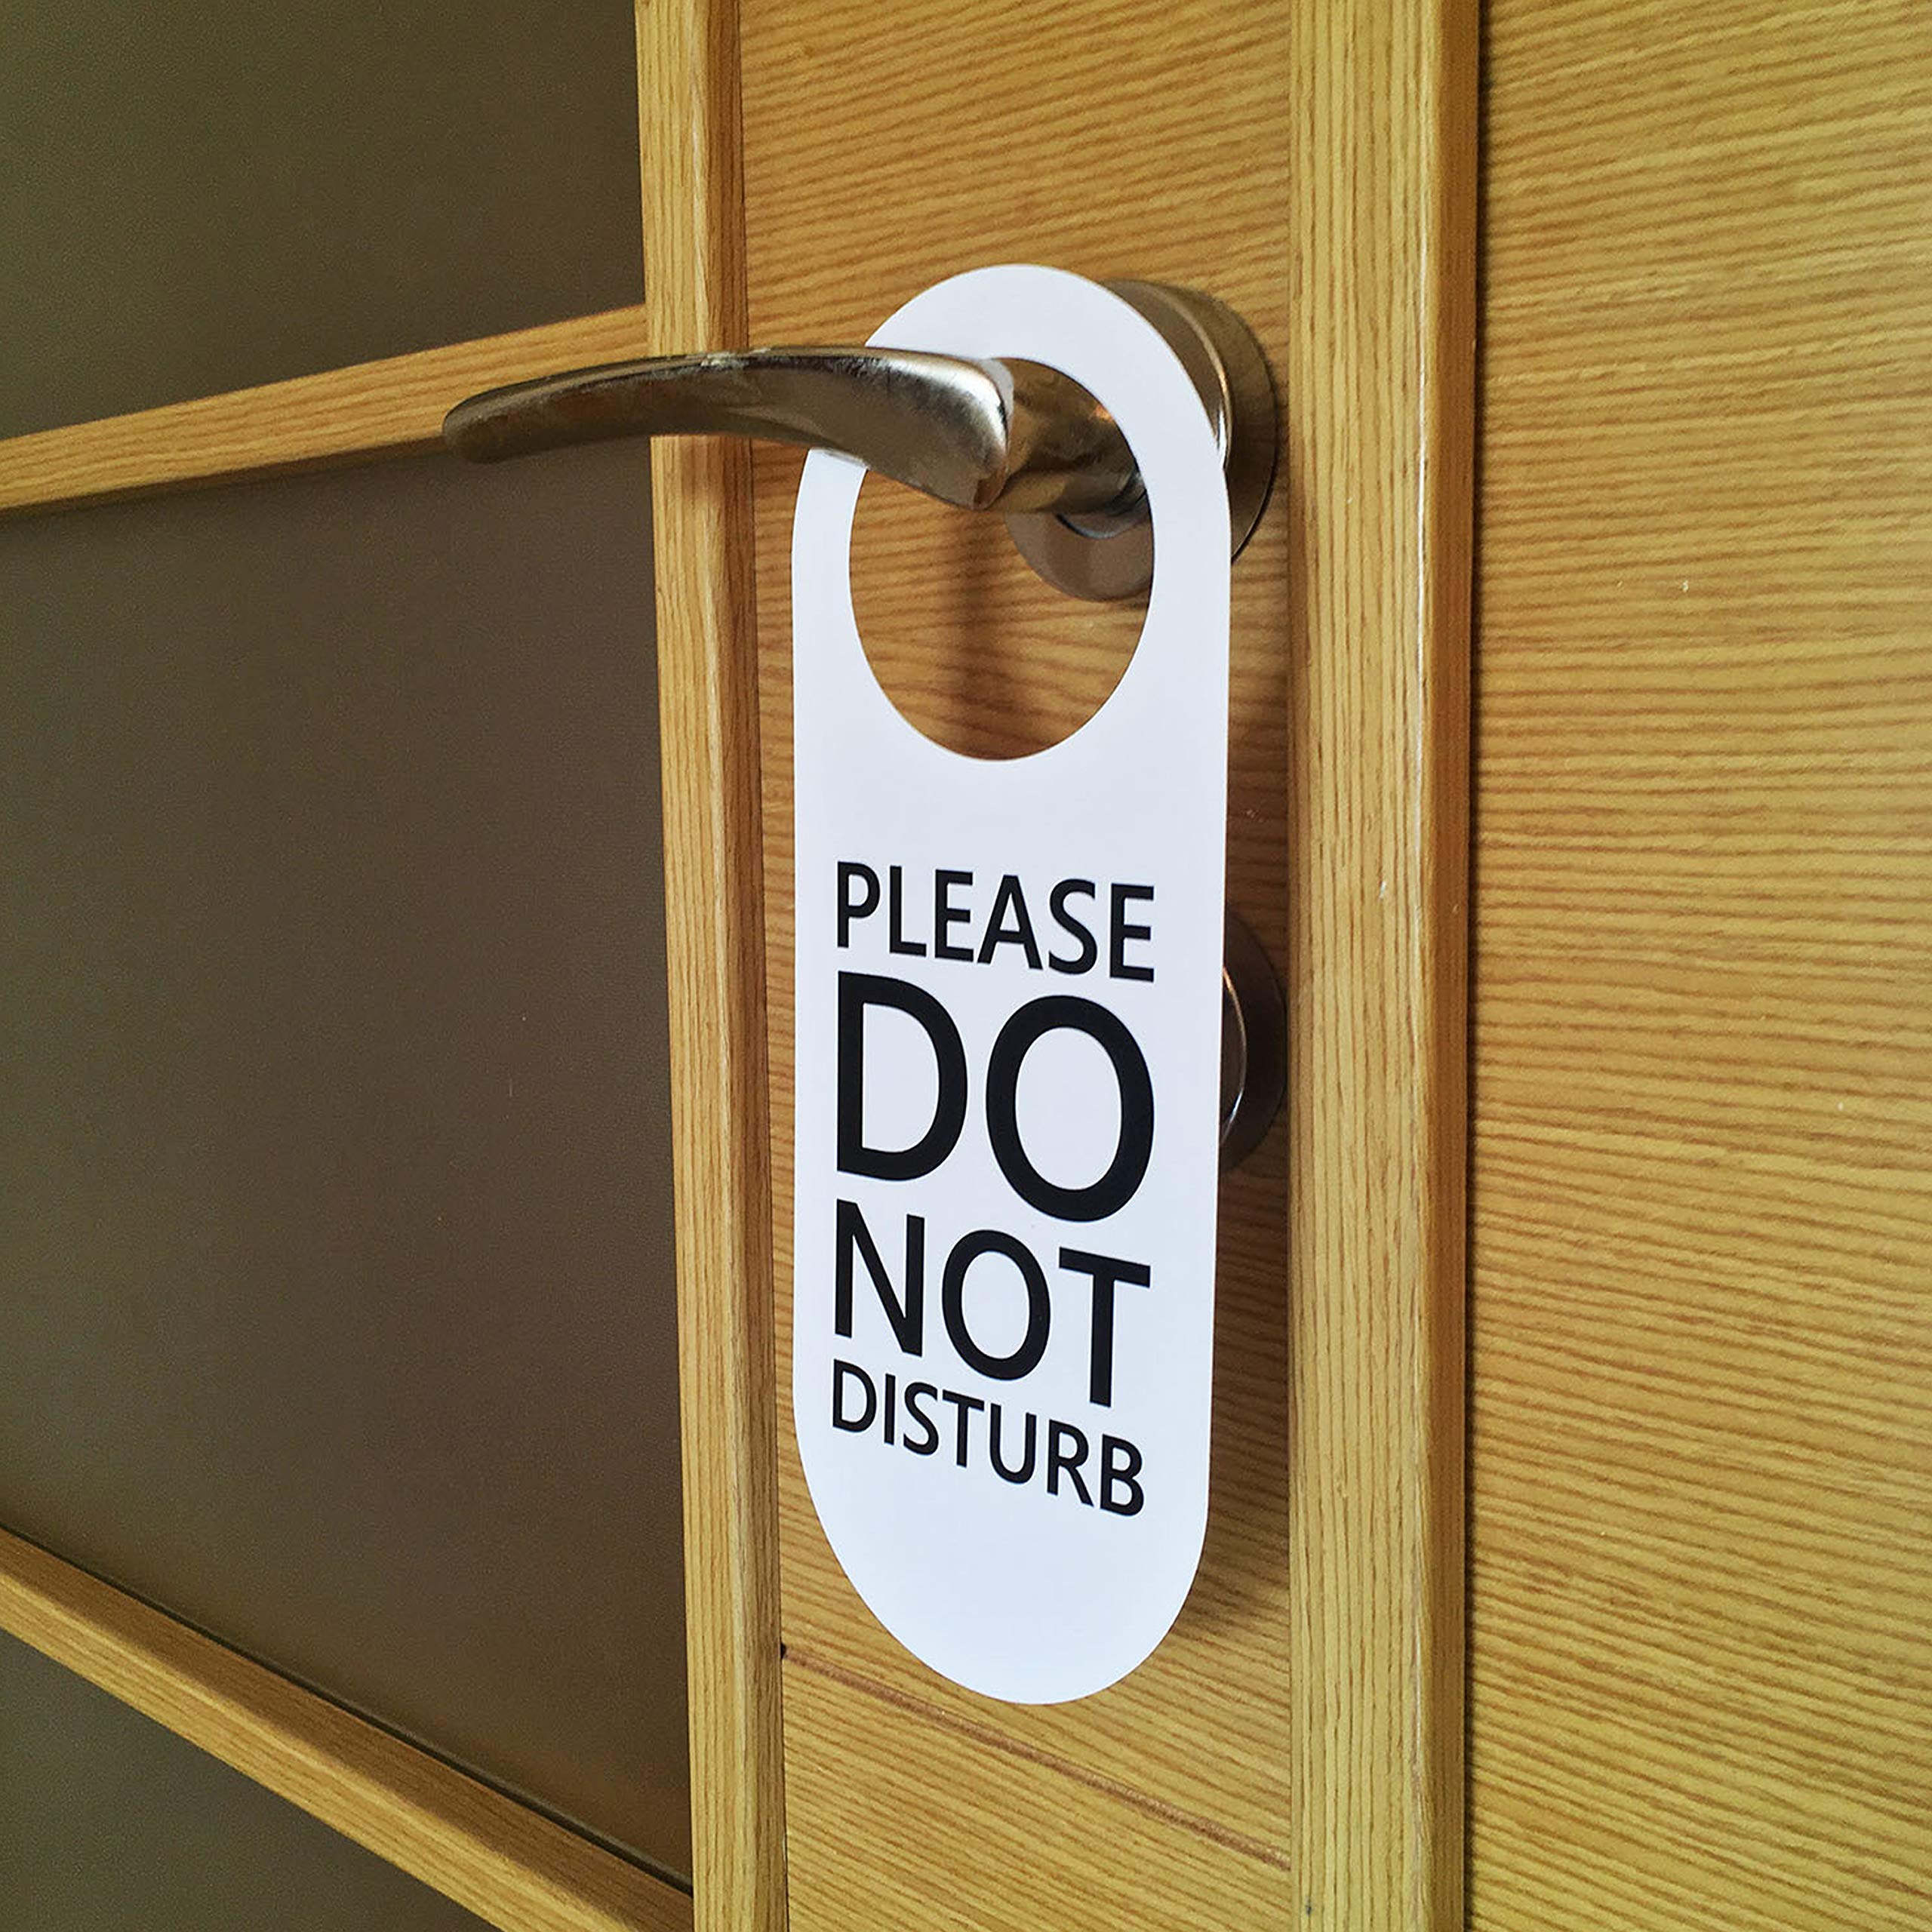 A closed door with a do not disturb sign.